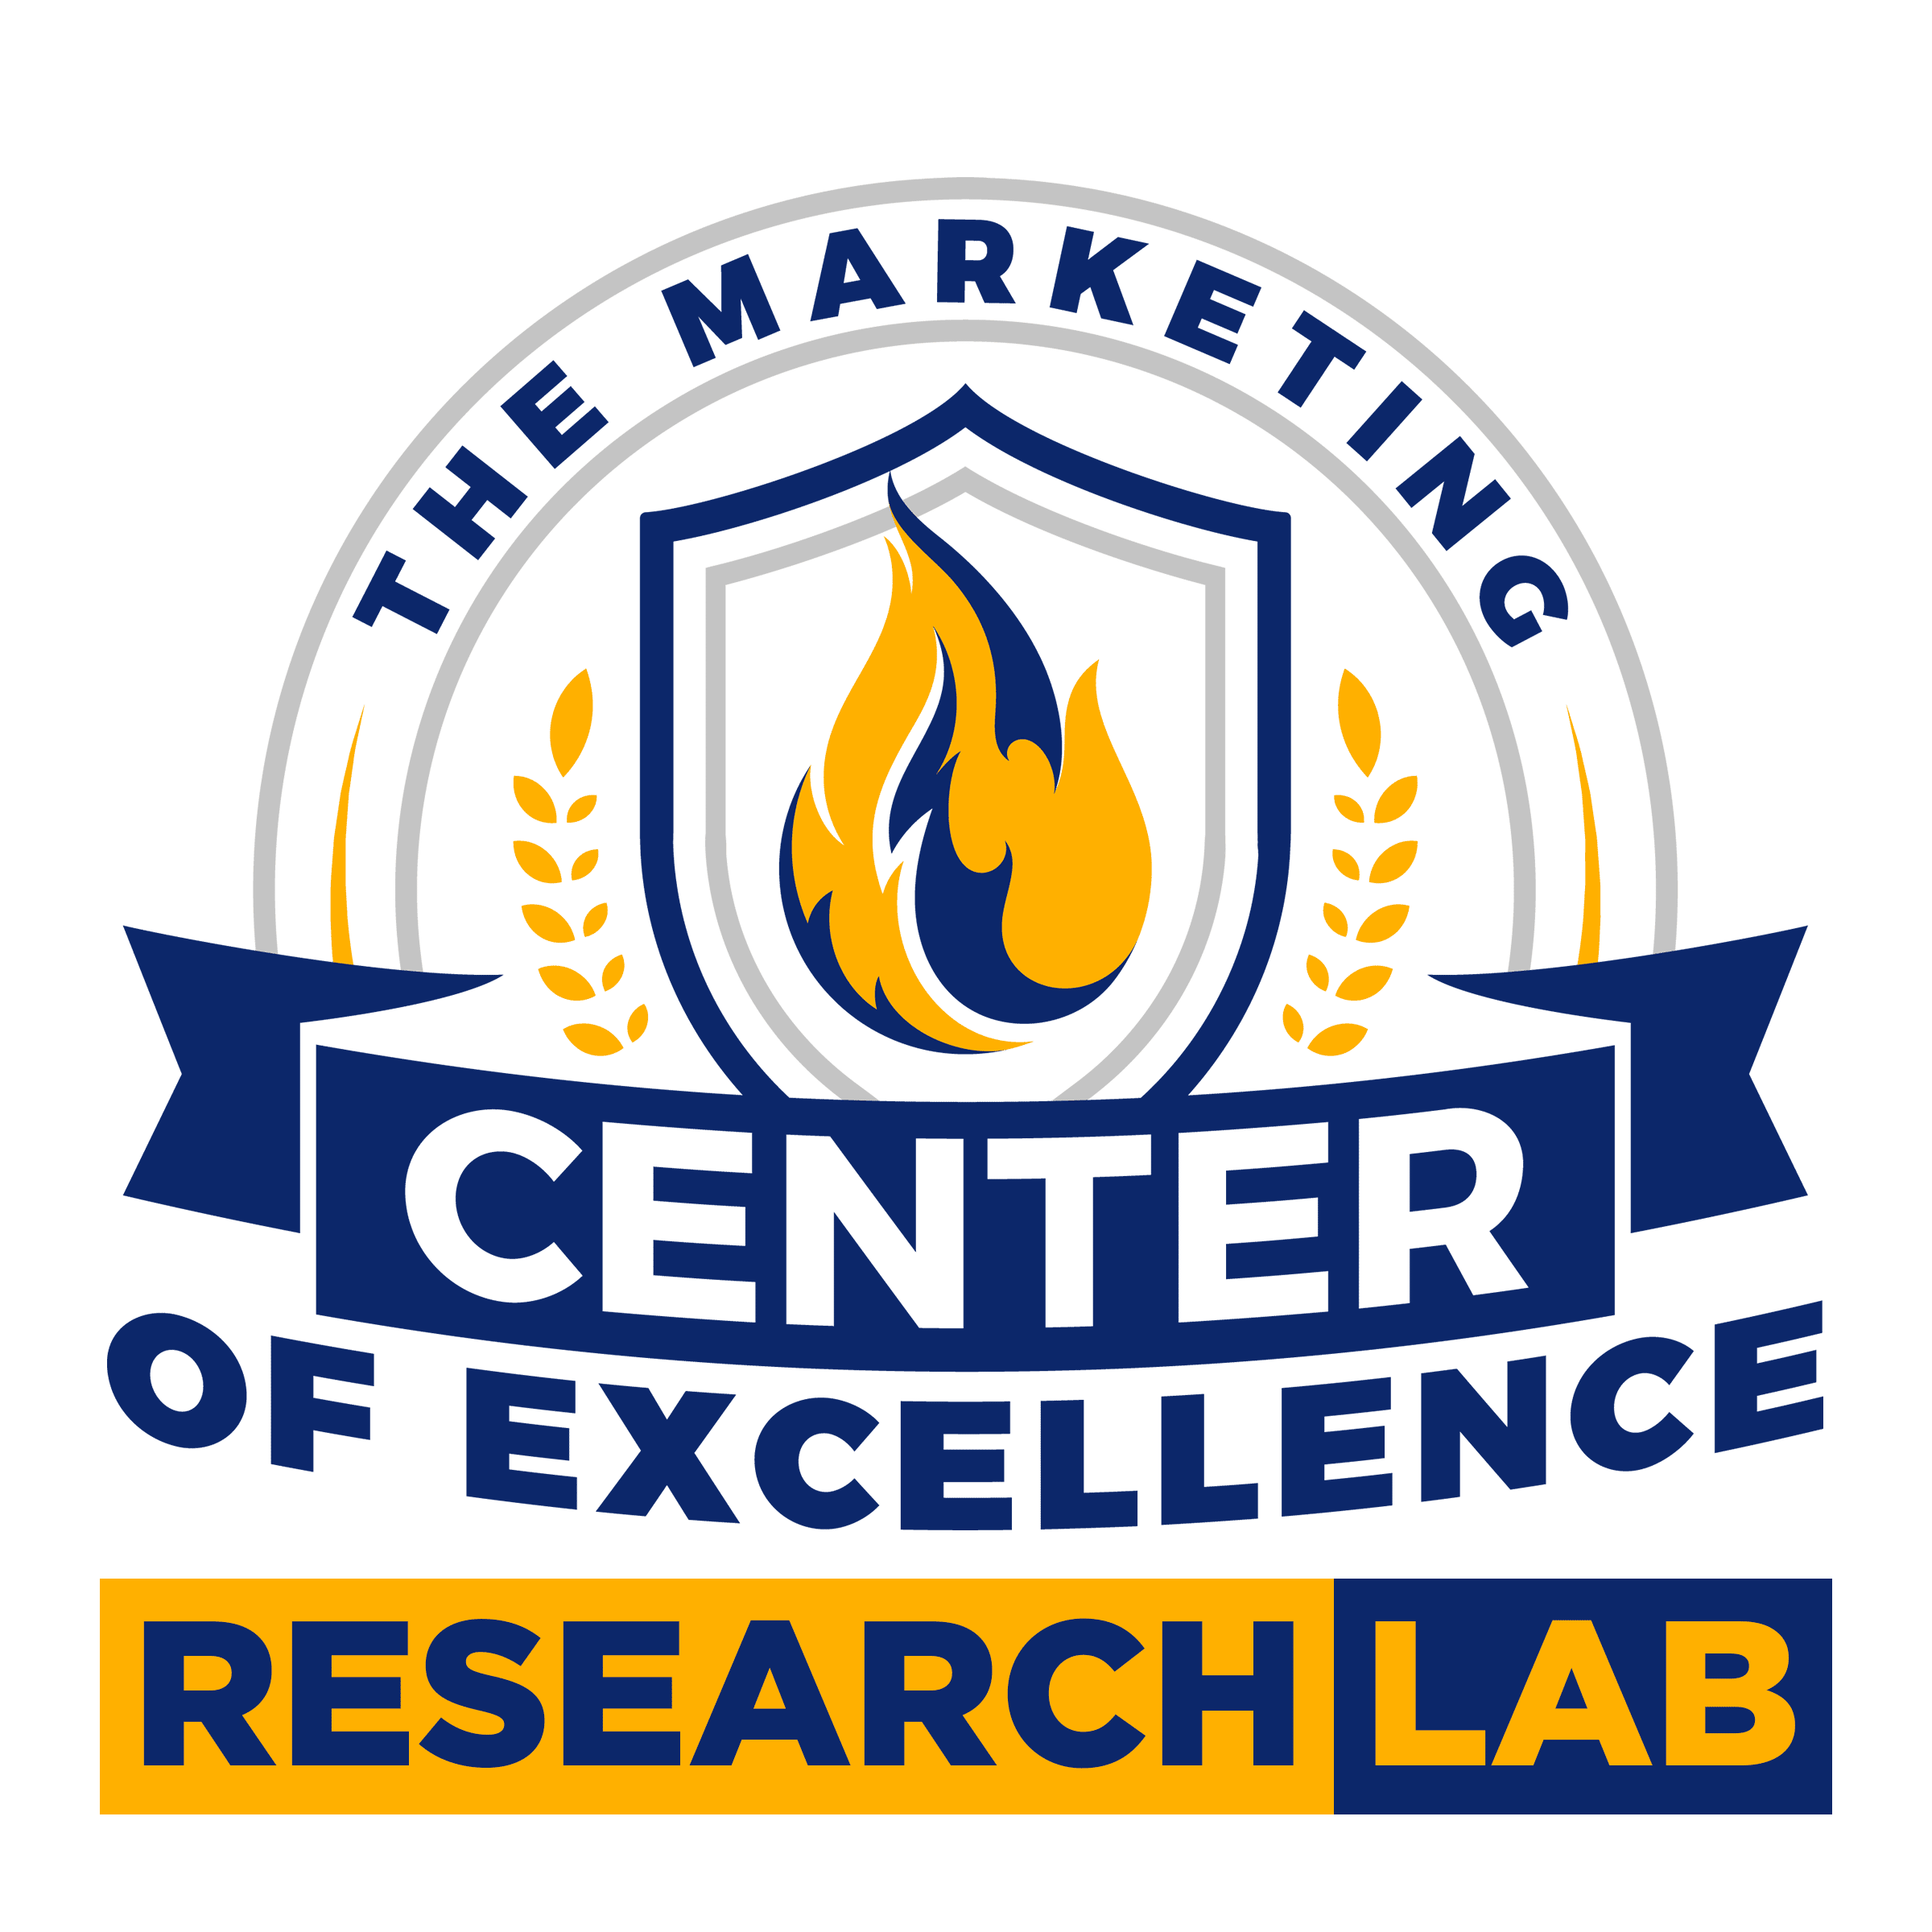 The Marketing Center of Excellence Research Lab